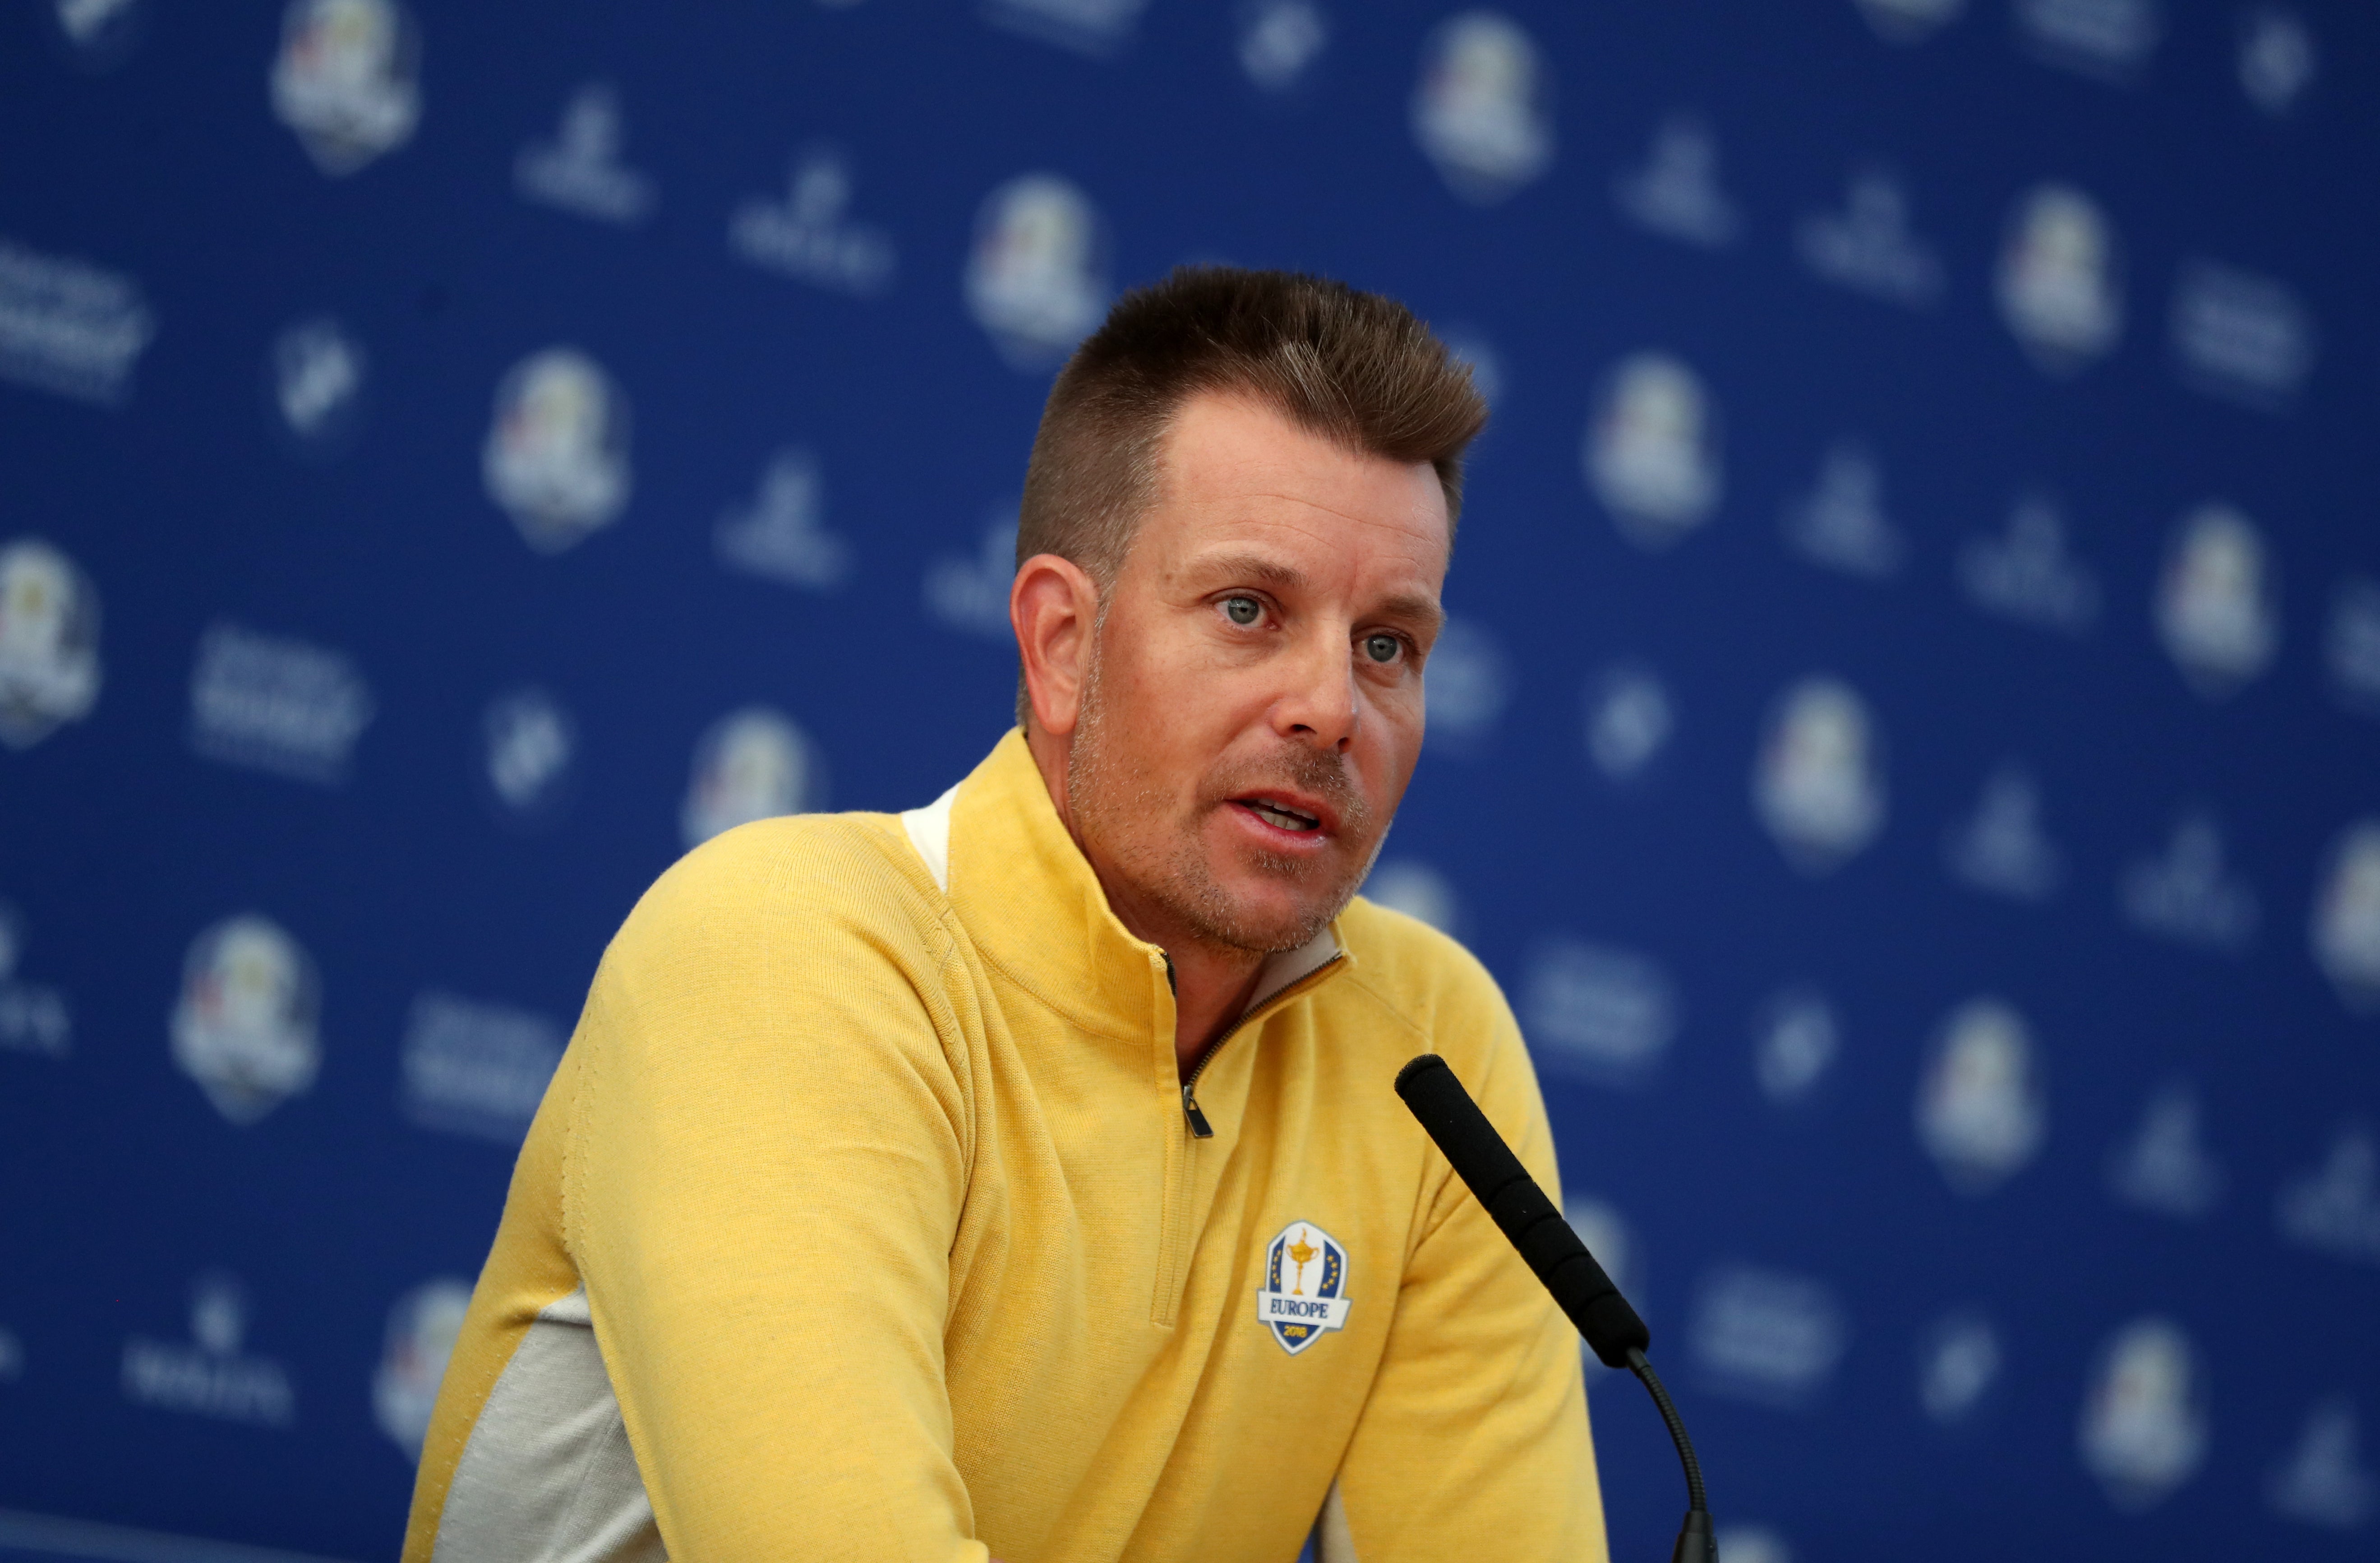 Henrik Stenson has been named Europe’s Ryder Cup captain (David Davies/PA)